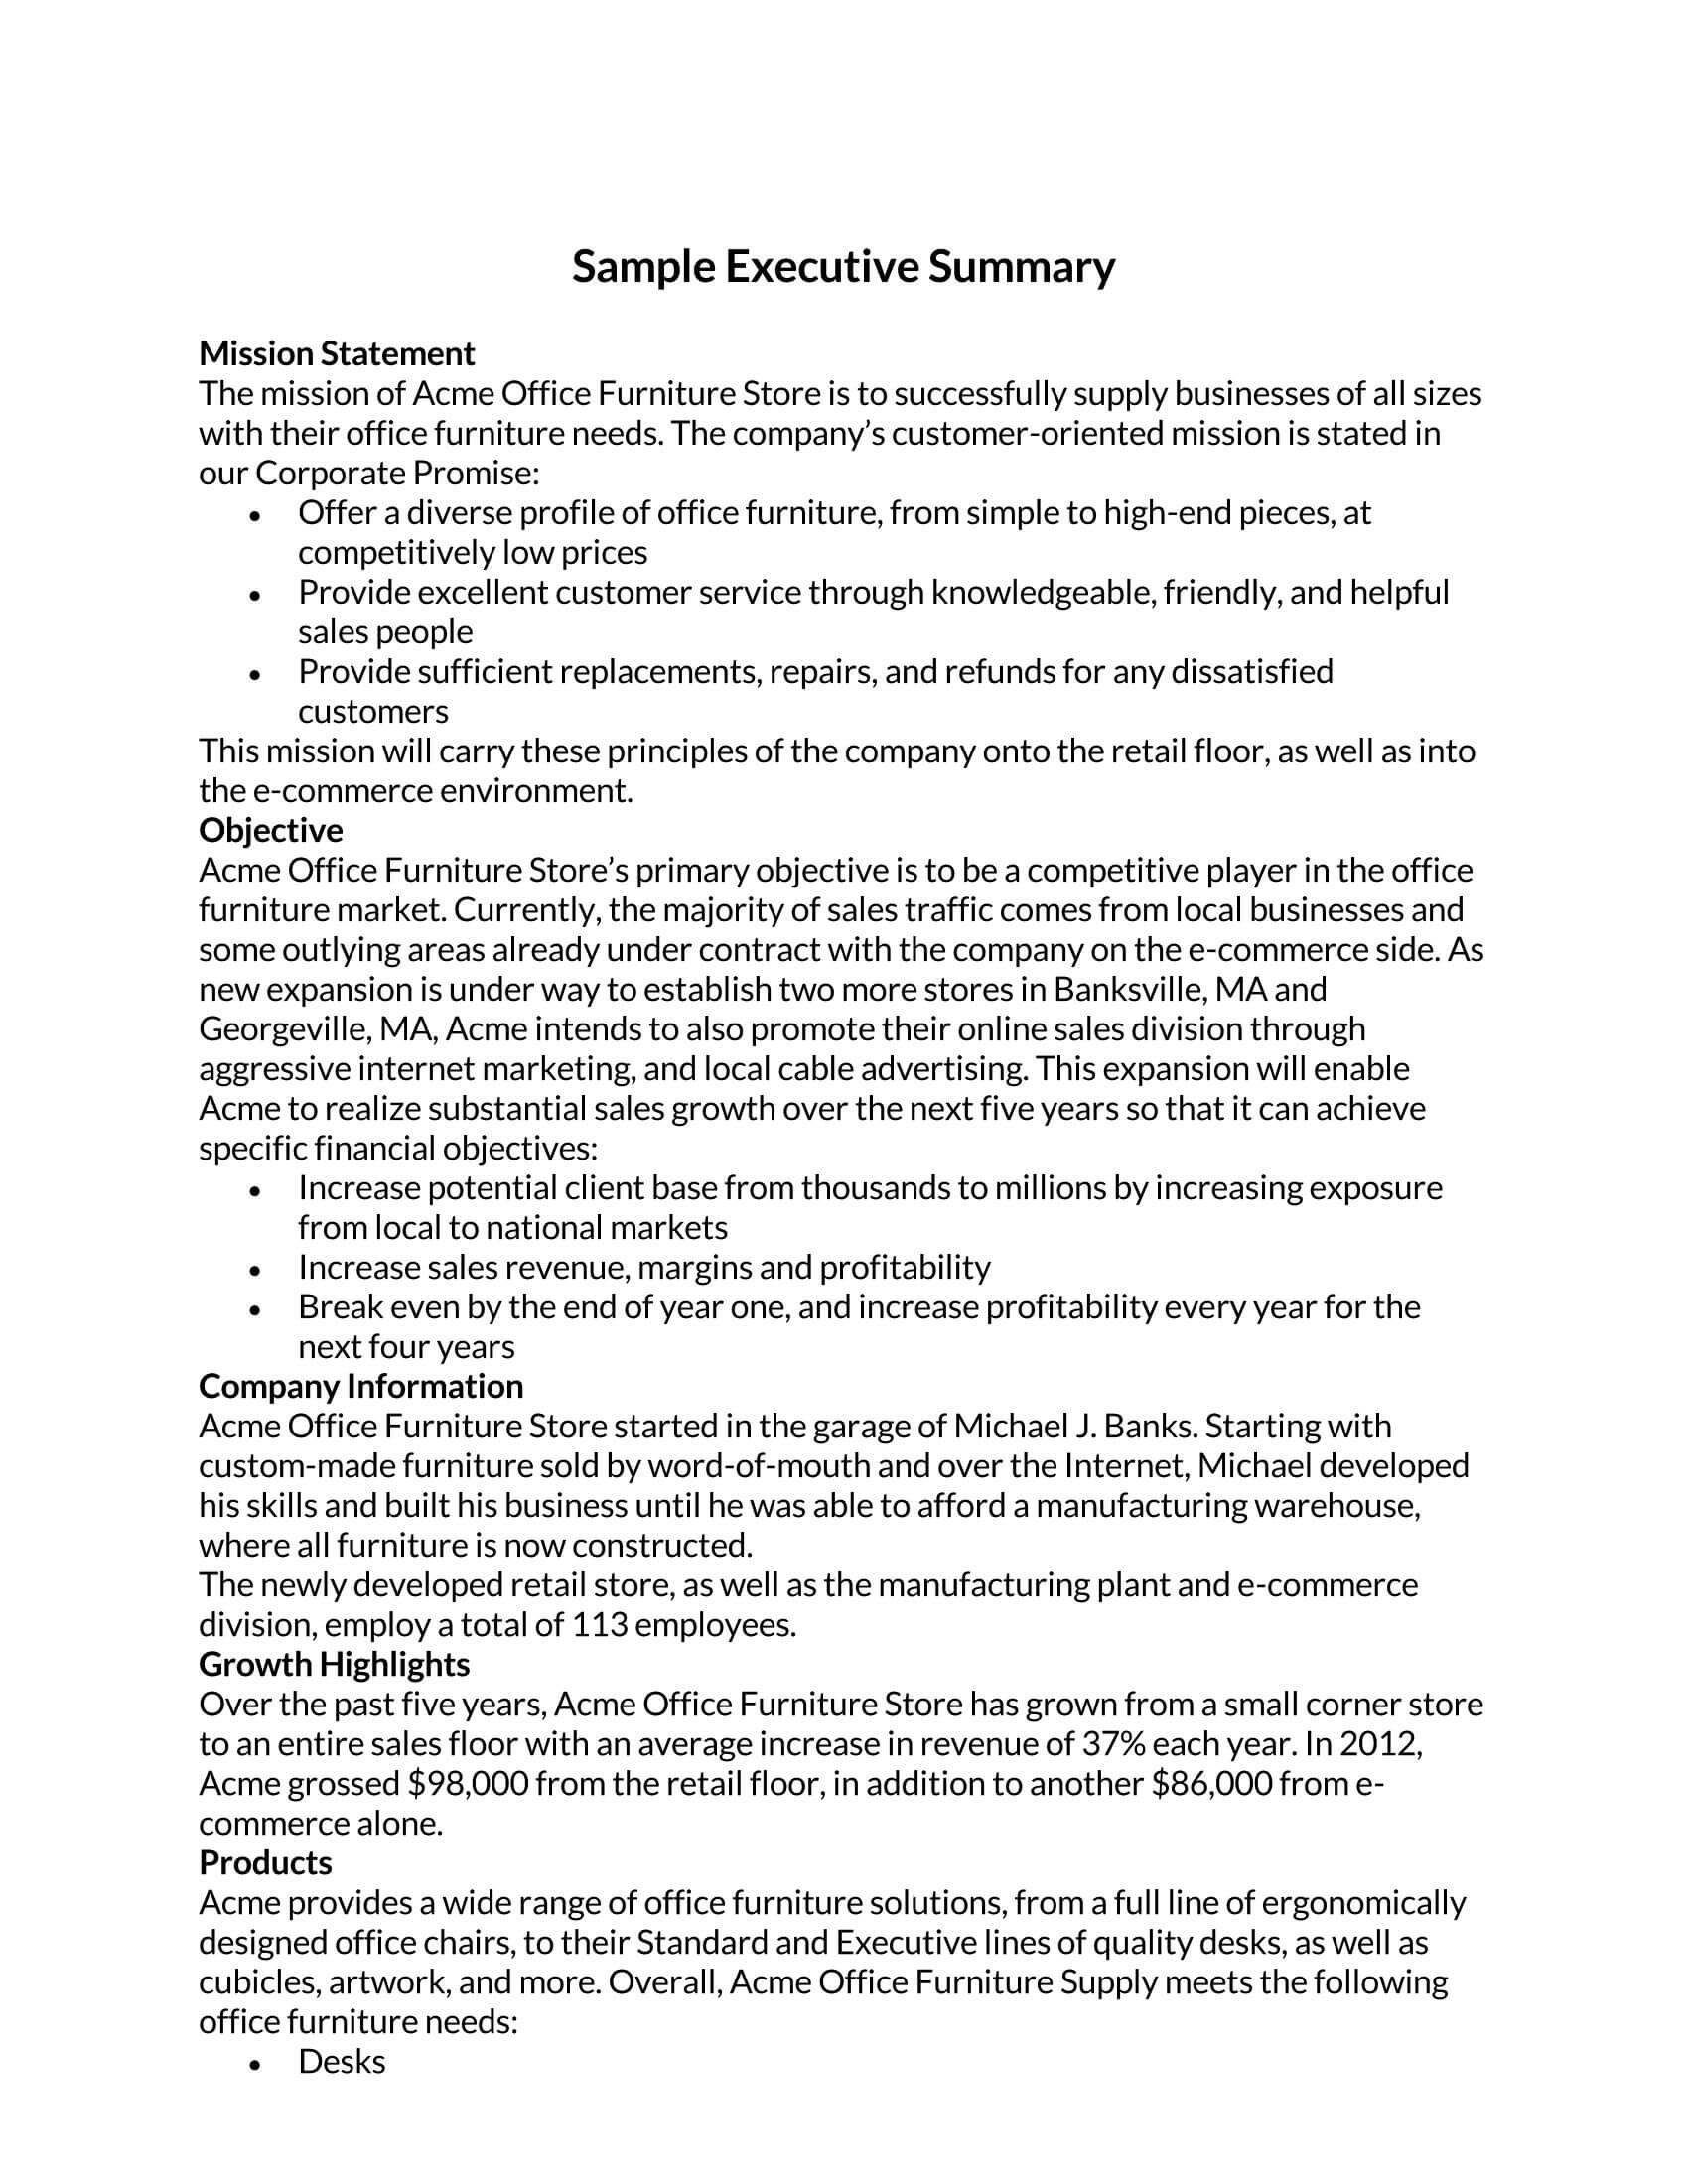 Customizable Mission Statement Executive Summary Sample for Word File